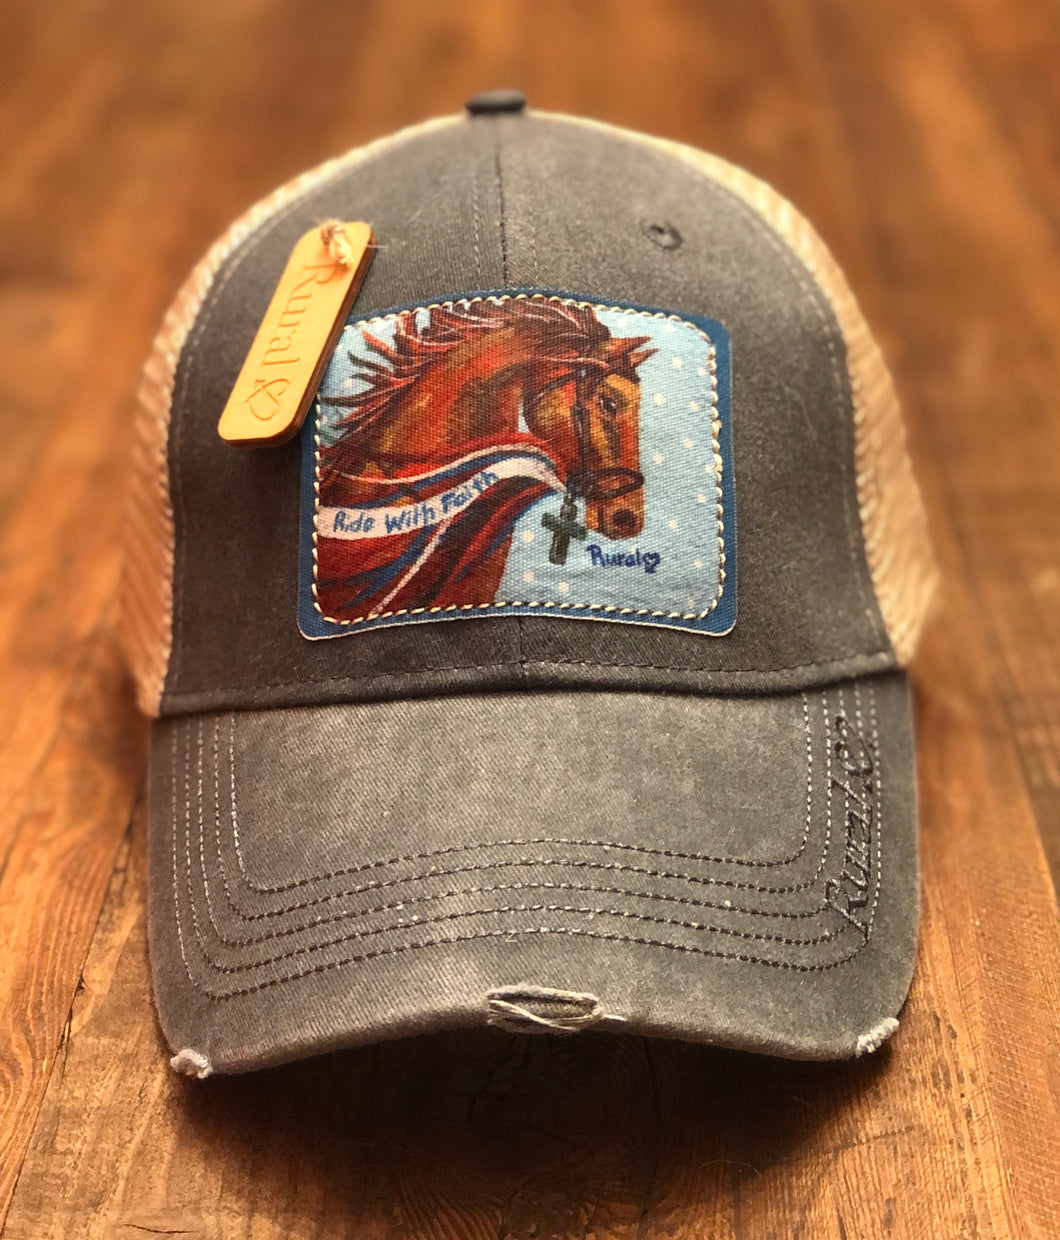 Rural Heart by Rene Earnhardt “Ride with Faith” ball cap in denim hat with Velcro closure.